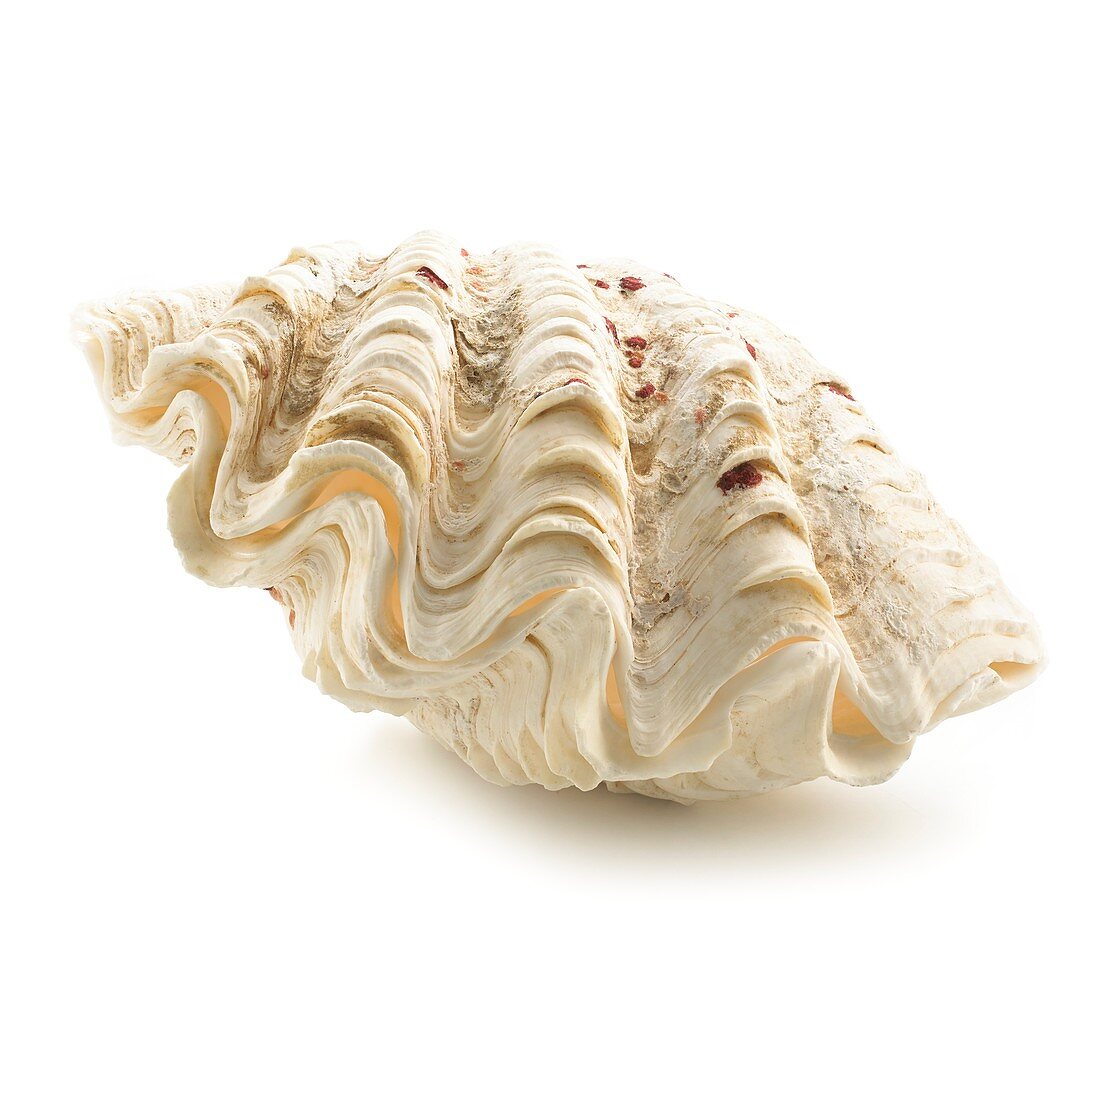 Fluted giant clam shell